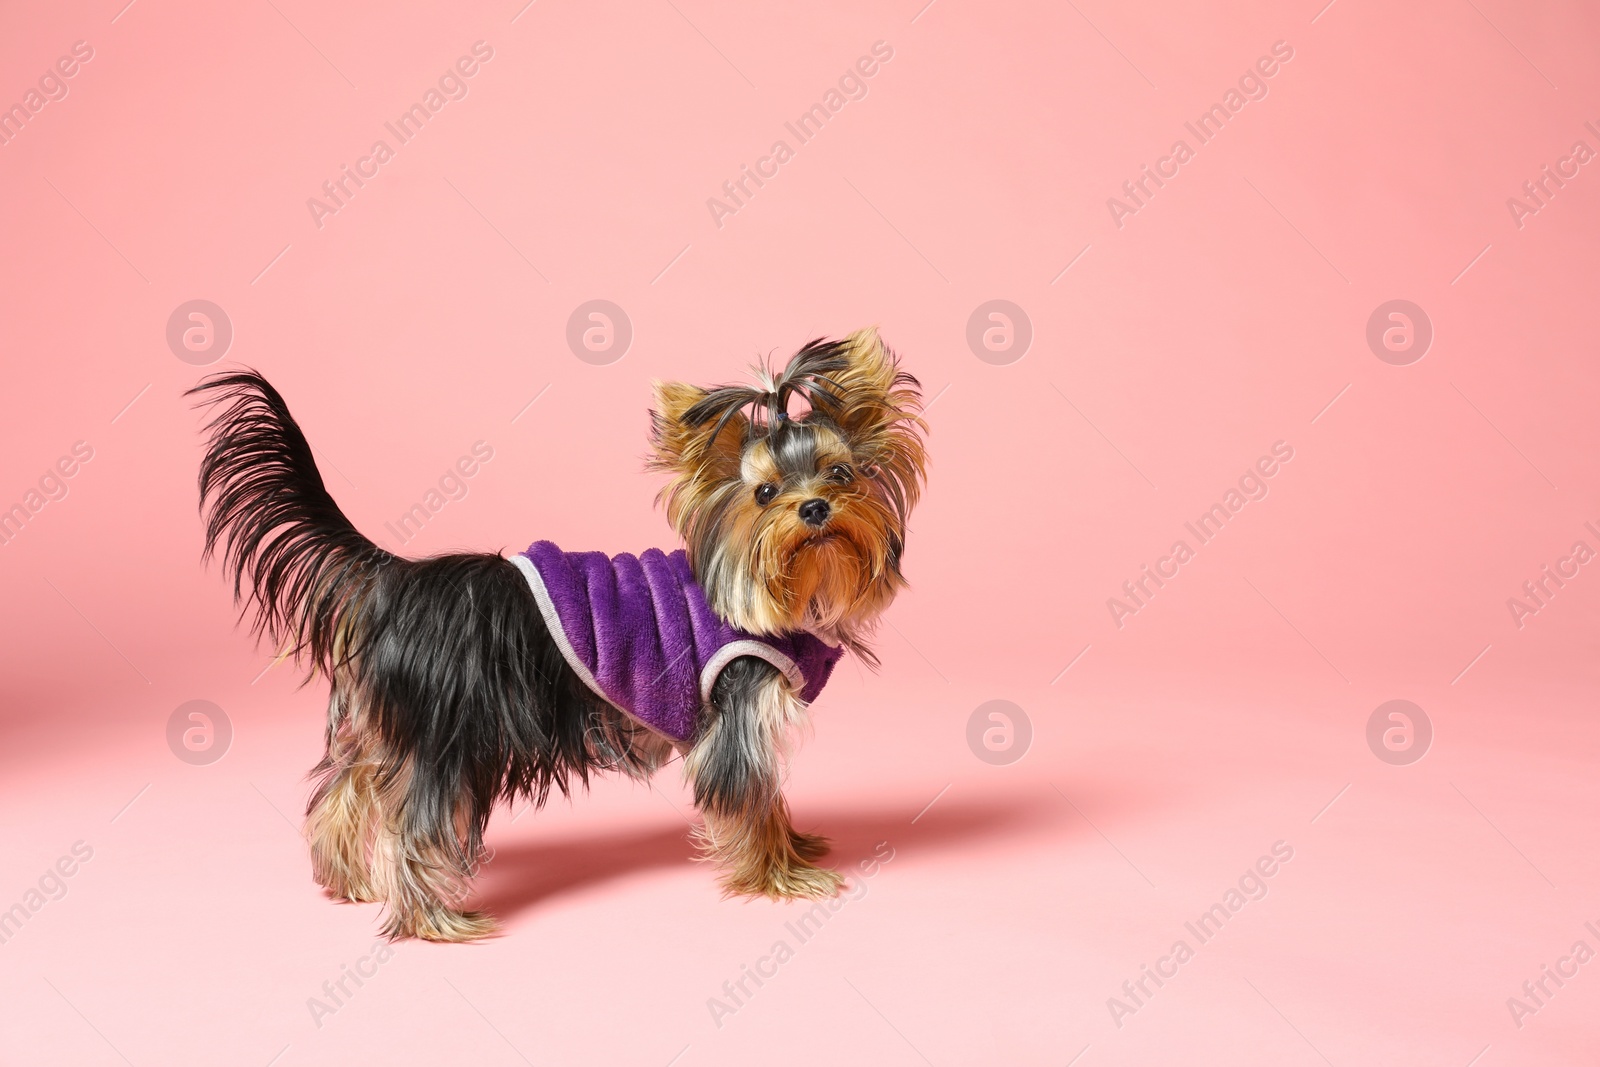 Photo of Adorable Yorkshire terrier wearing warm sweater on pink background. Cute dog